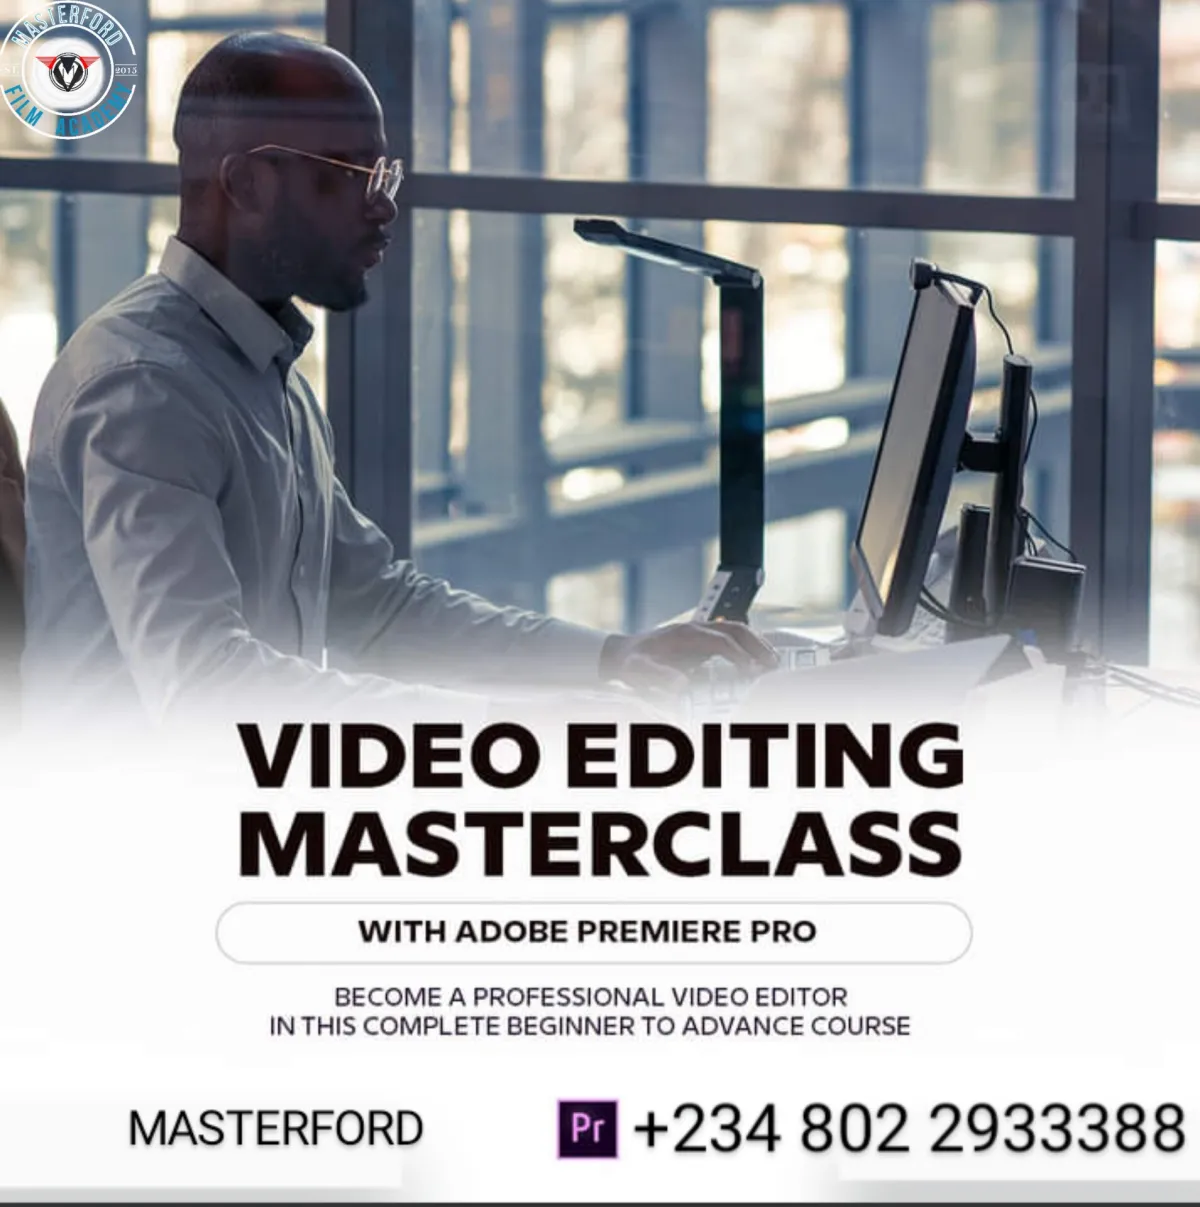 I Will Do Video Editing for YouTube, Vlogs, and Marketing – Budget-Friendly